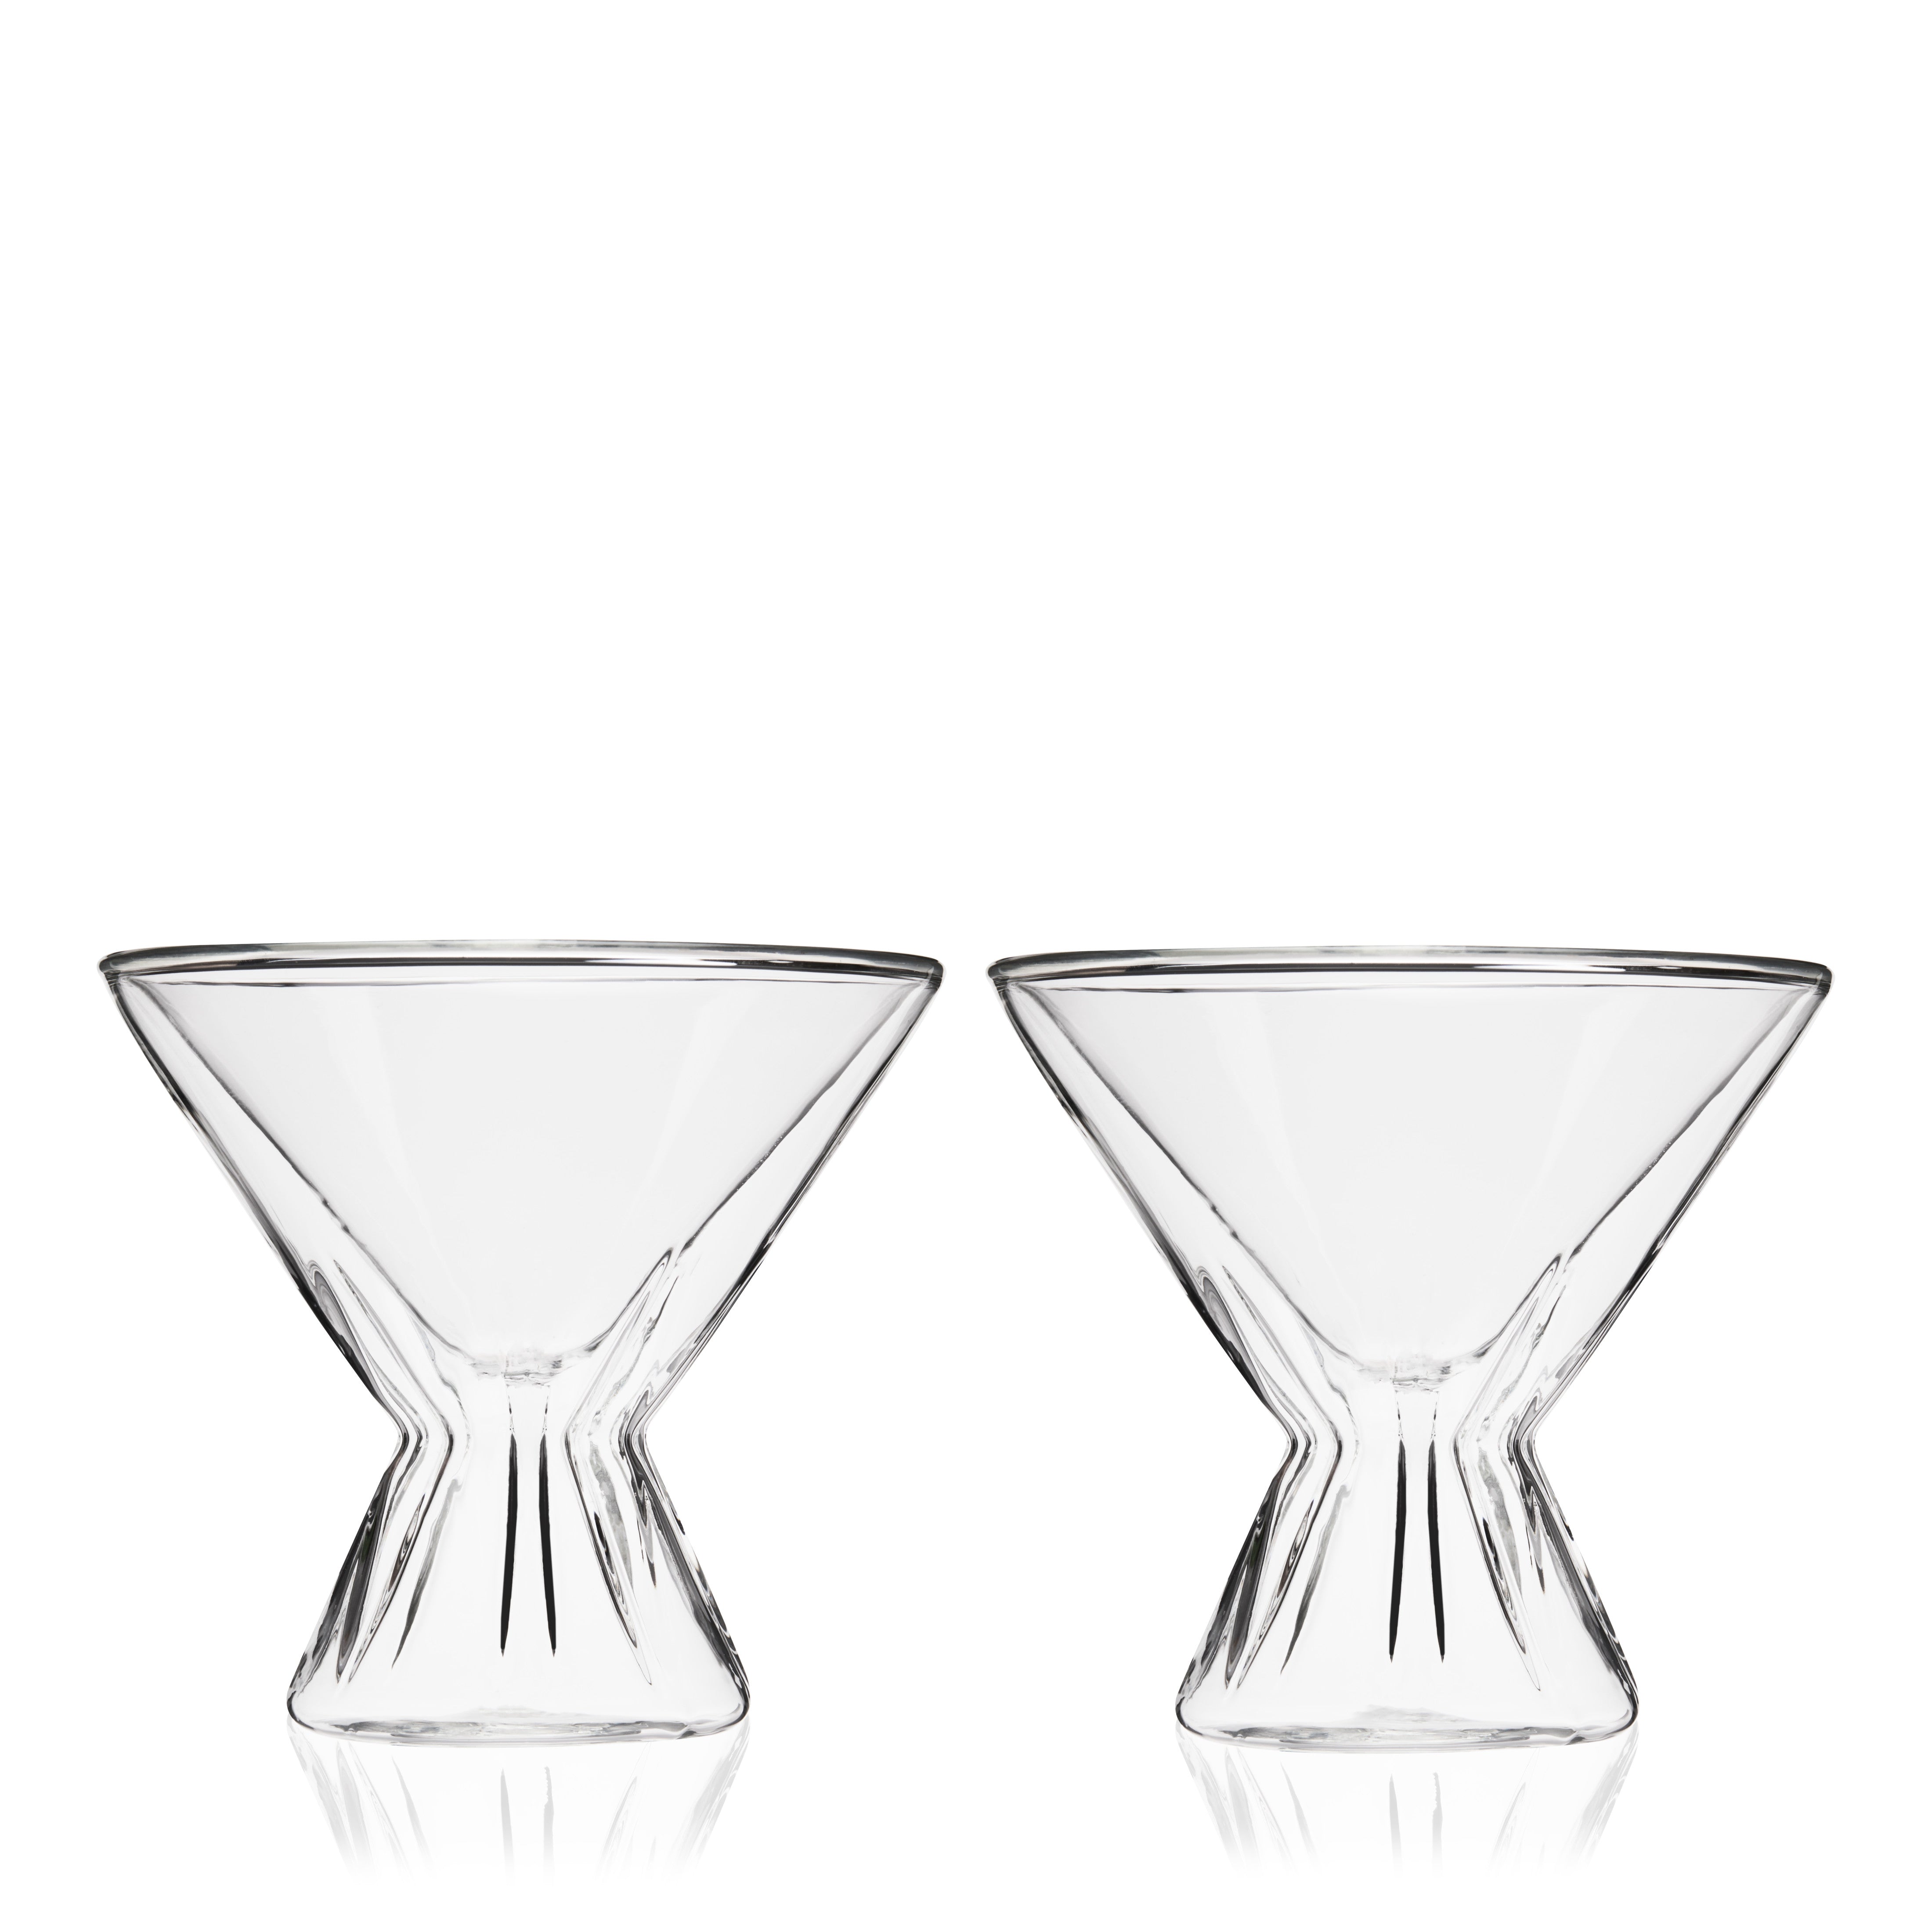 Ysell Insulated Martini Glasses,Set of 2,8 oz,Double Walled Cocktail  Glasses,Lead-Free Glass Cups Great for Cold or Hot Drinks: Martini Glasses